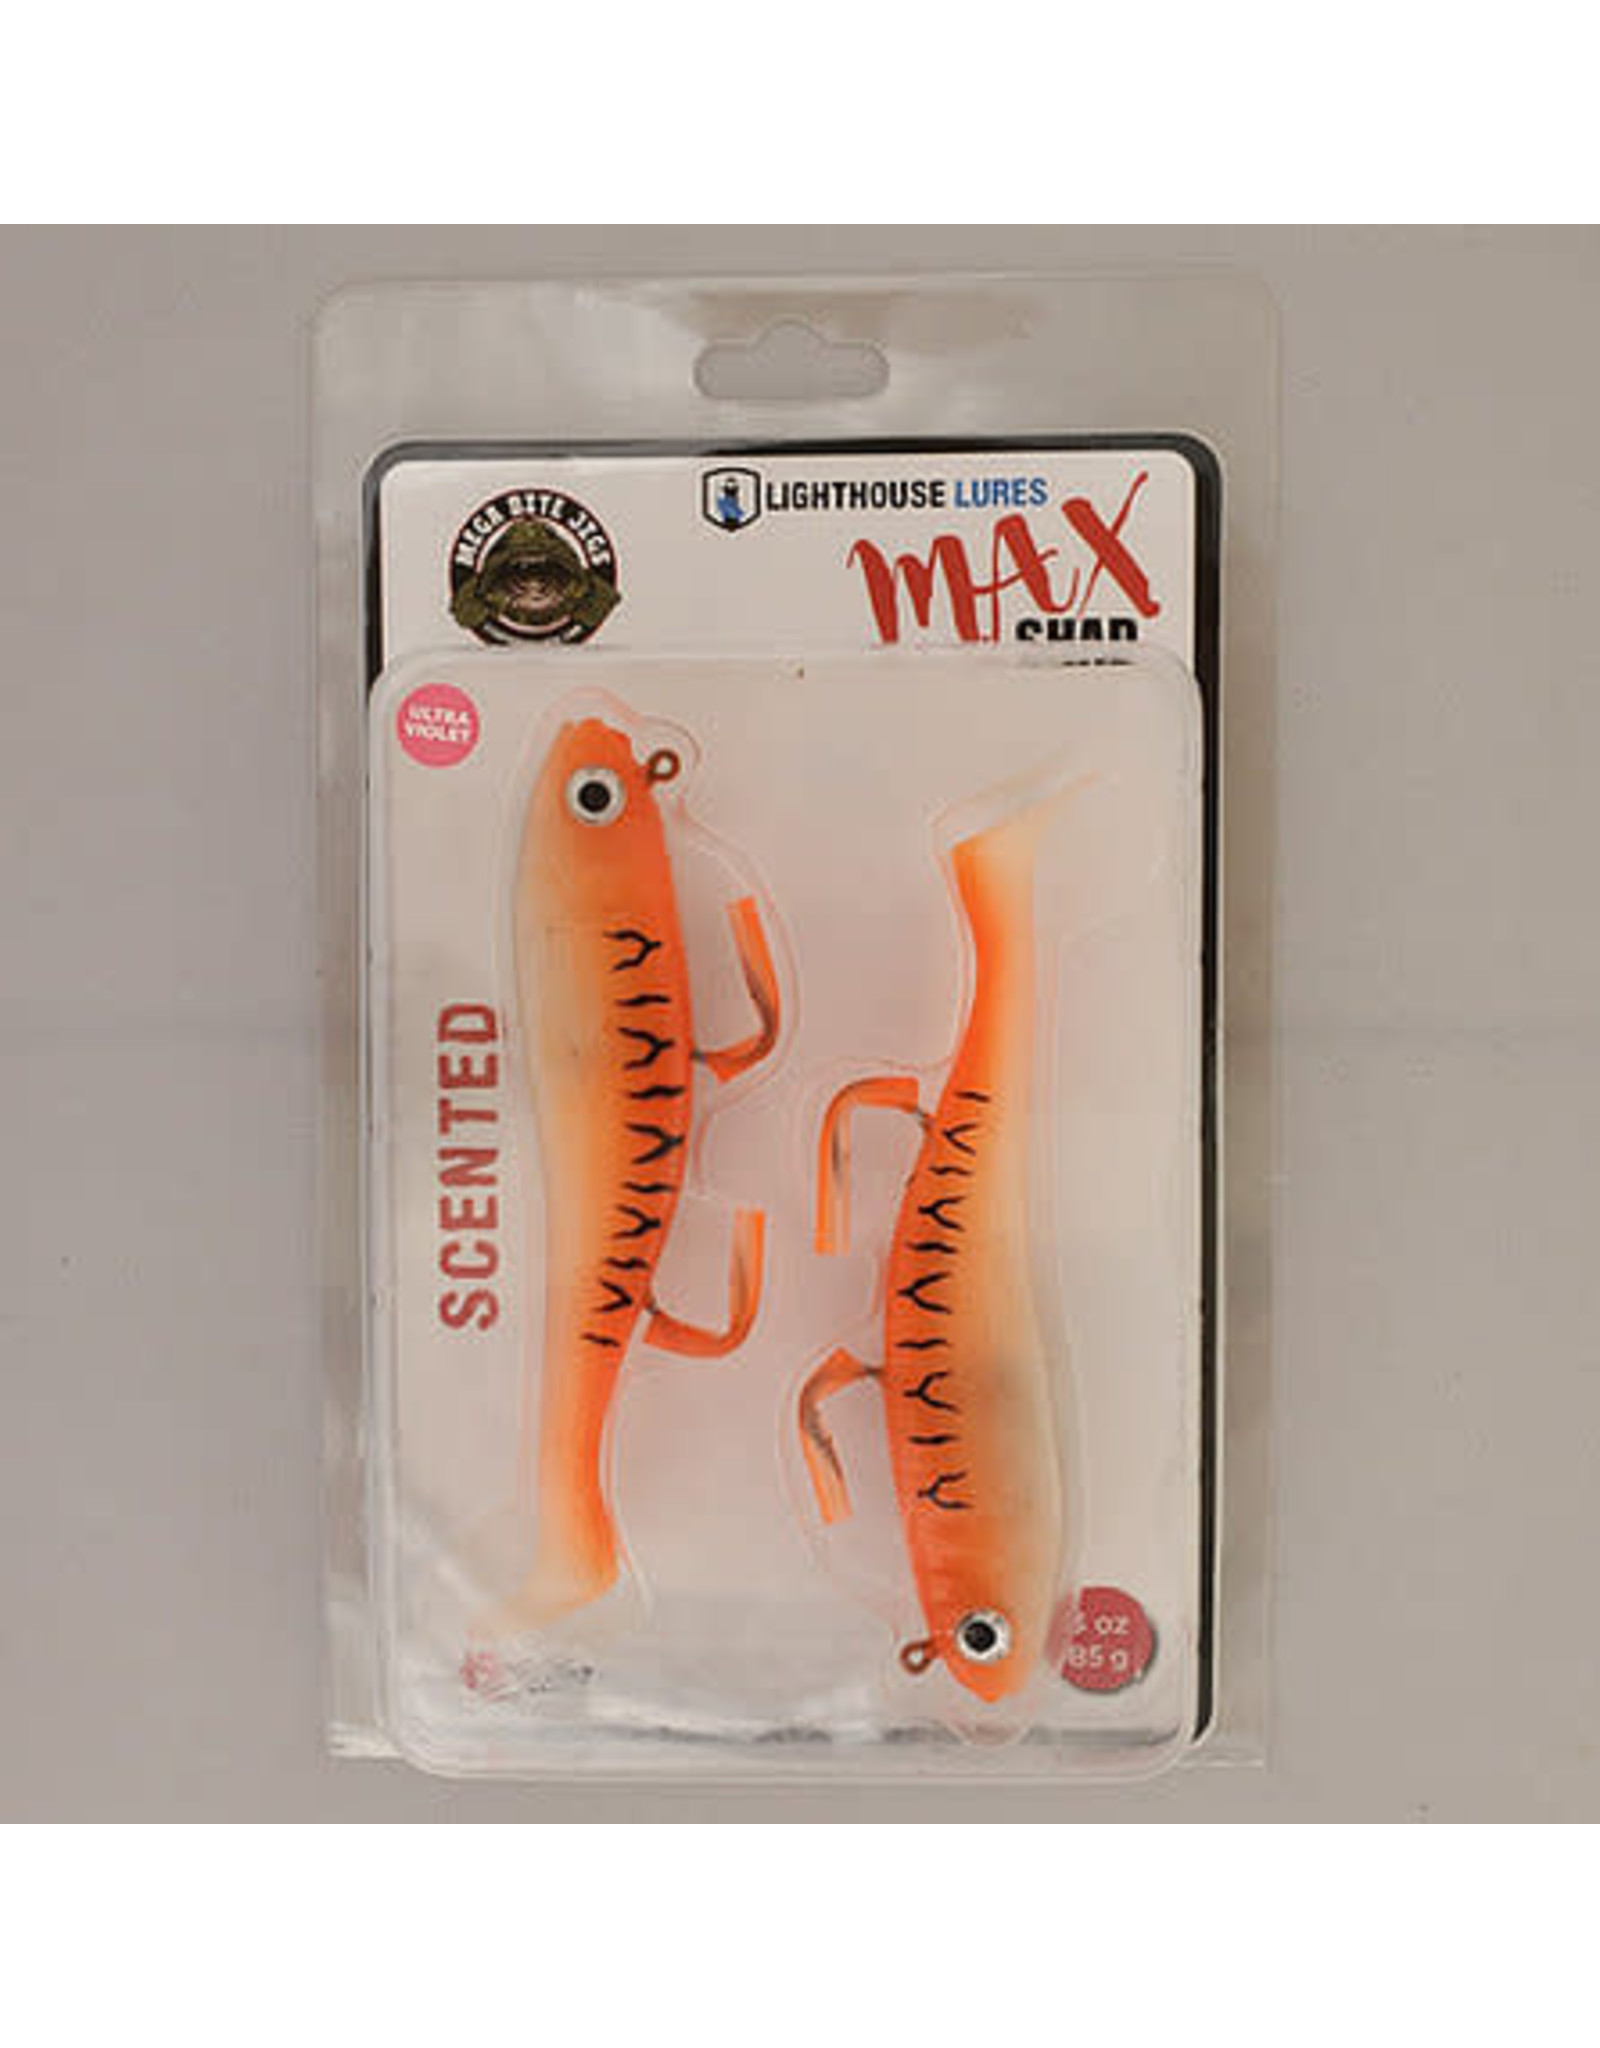 LIGHTHOUSE LURES LIGHTHOUSE LURES MAX SHAD 3 oz